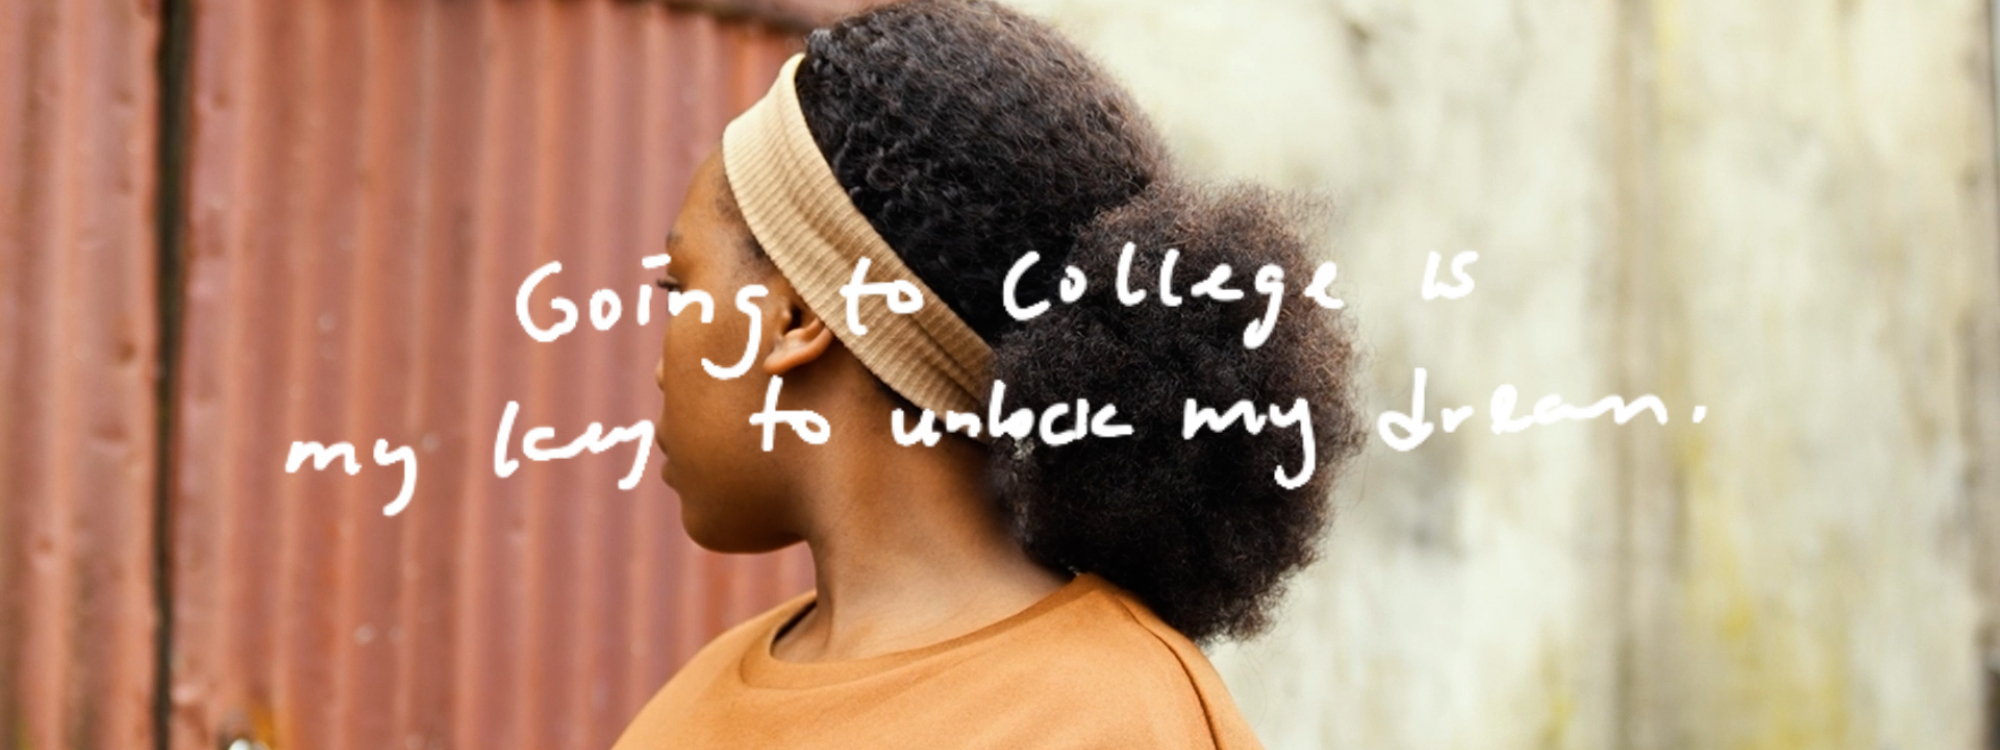 Side profile of young woman in orange sweater. Text reads "Going to college is the key to unlock my dreams"